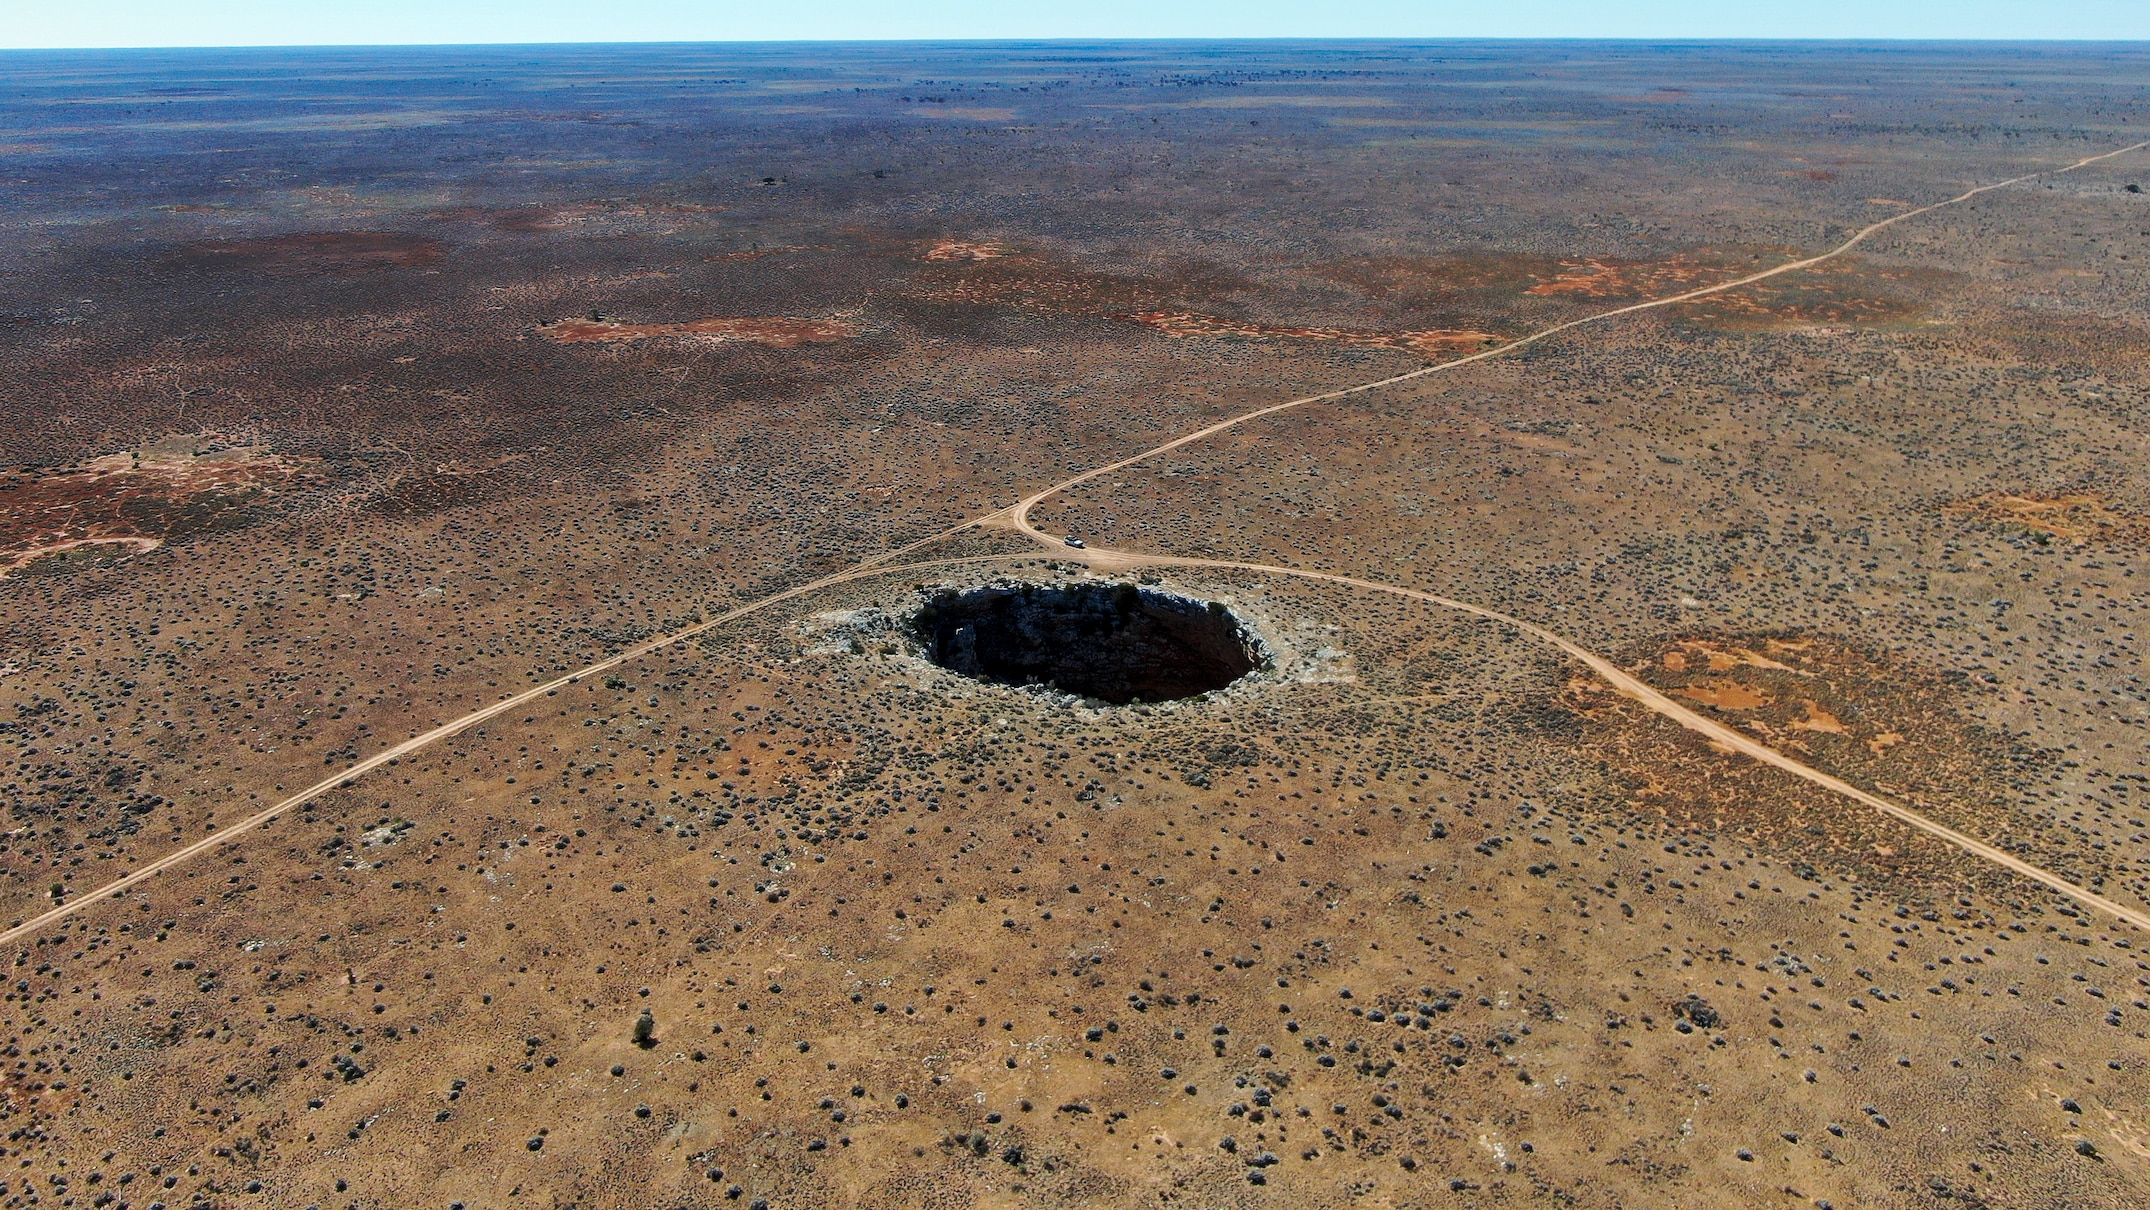 beneath the plains of the nullarbor lies an underground world formed over millions of years